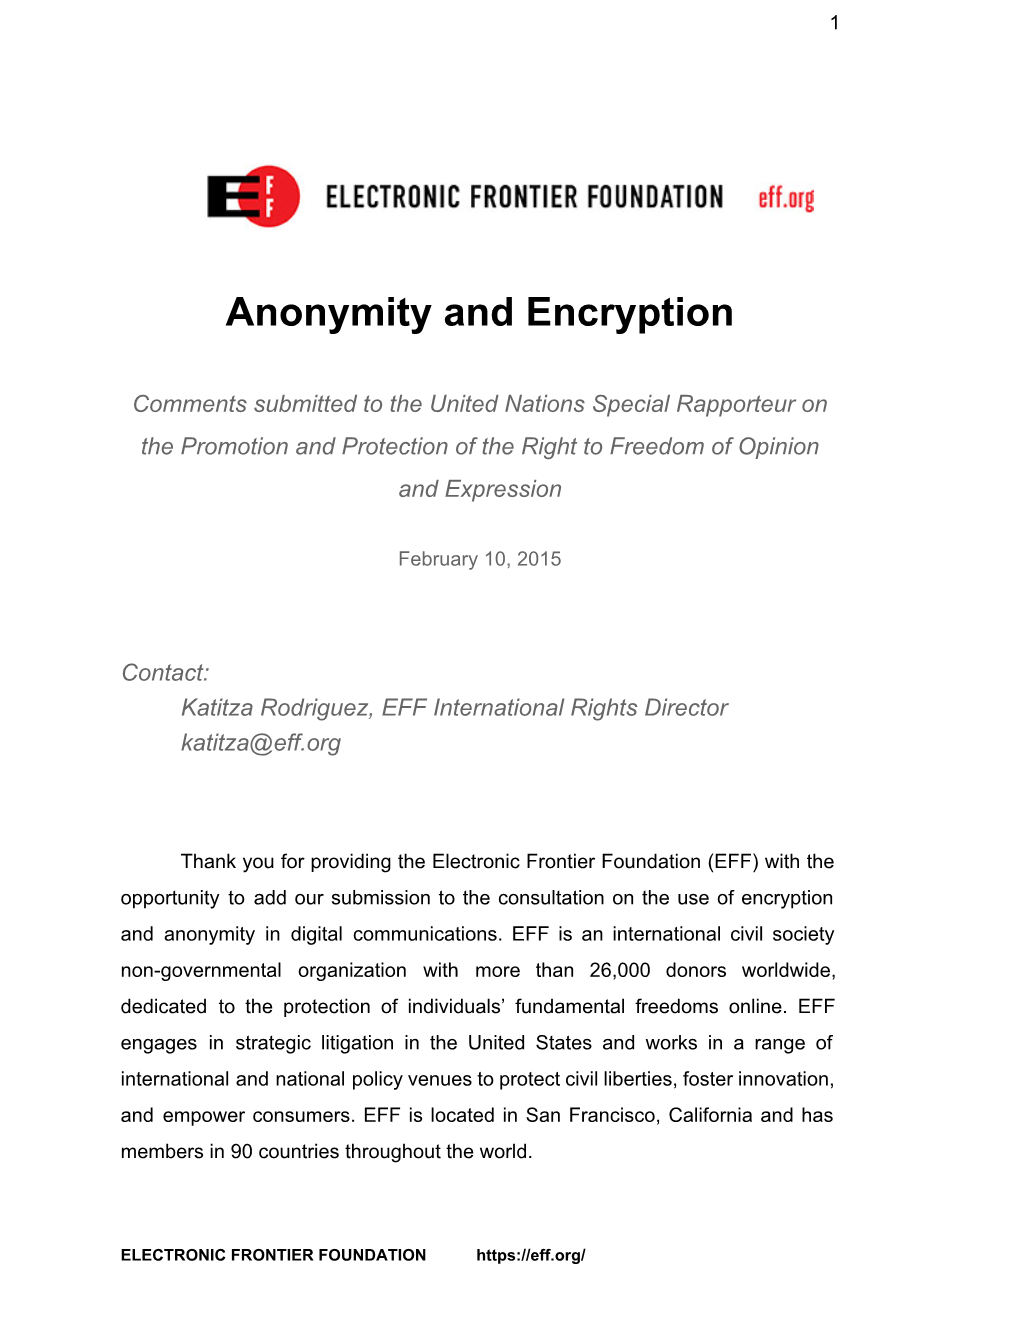 Anonymity and Encryption